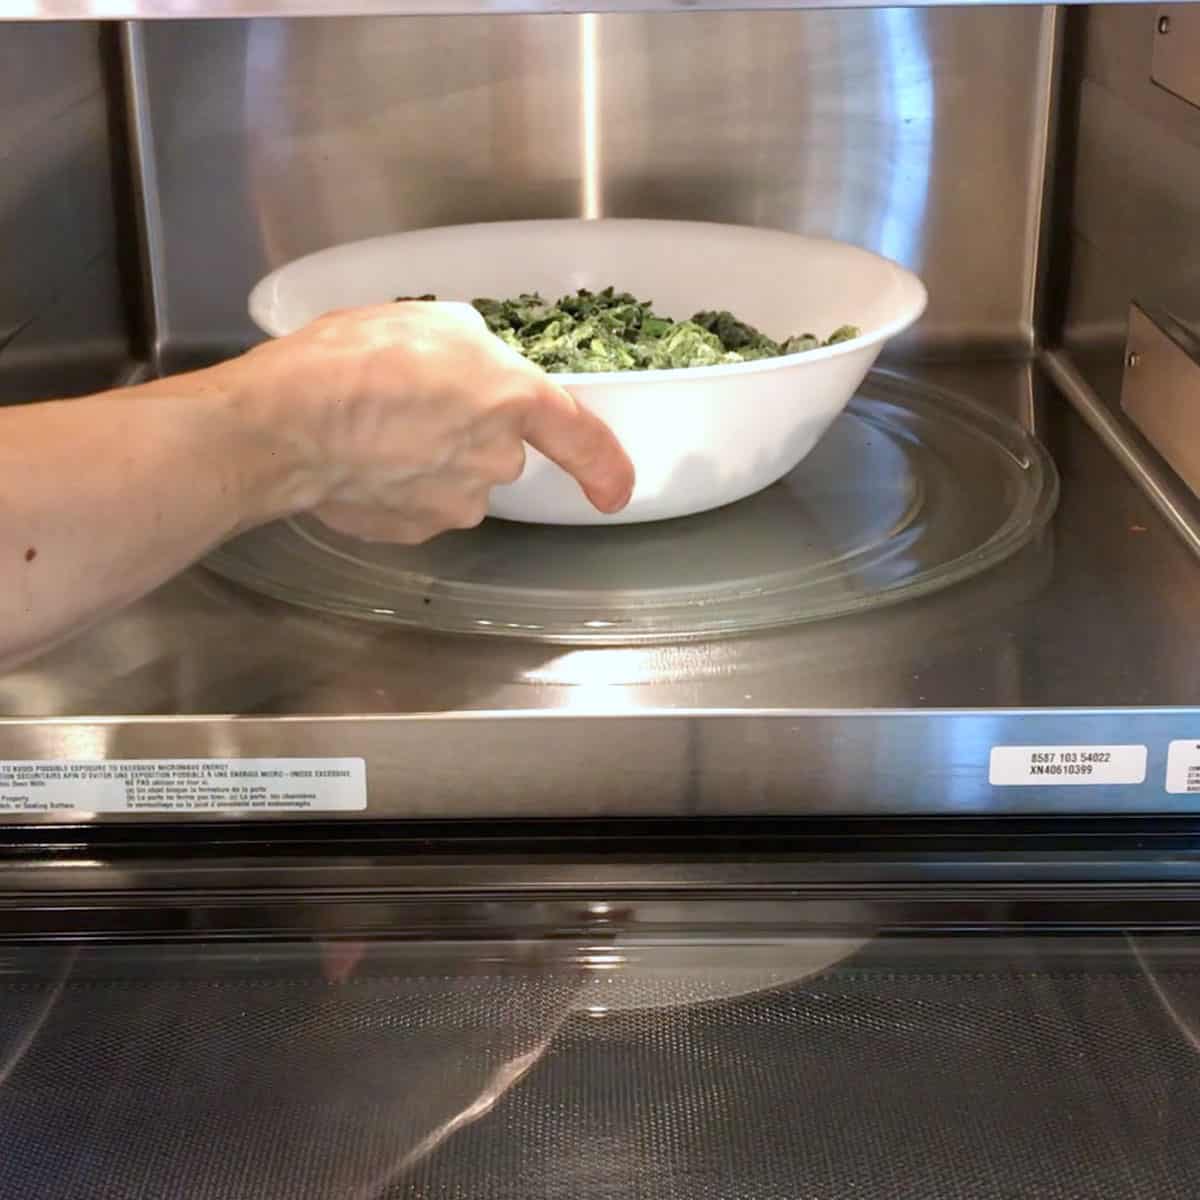 Defrosting the frozen spinach in the microwave. 